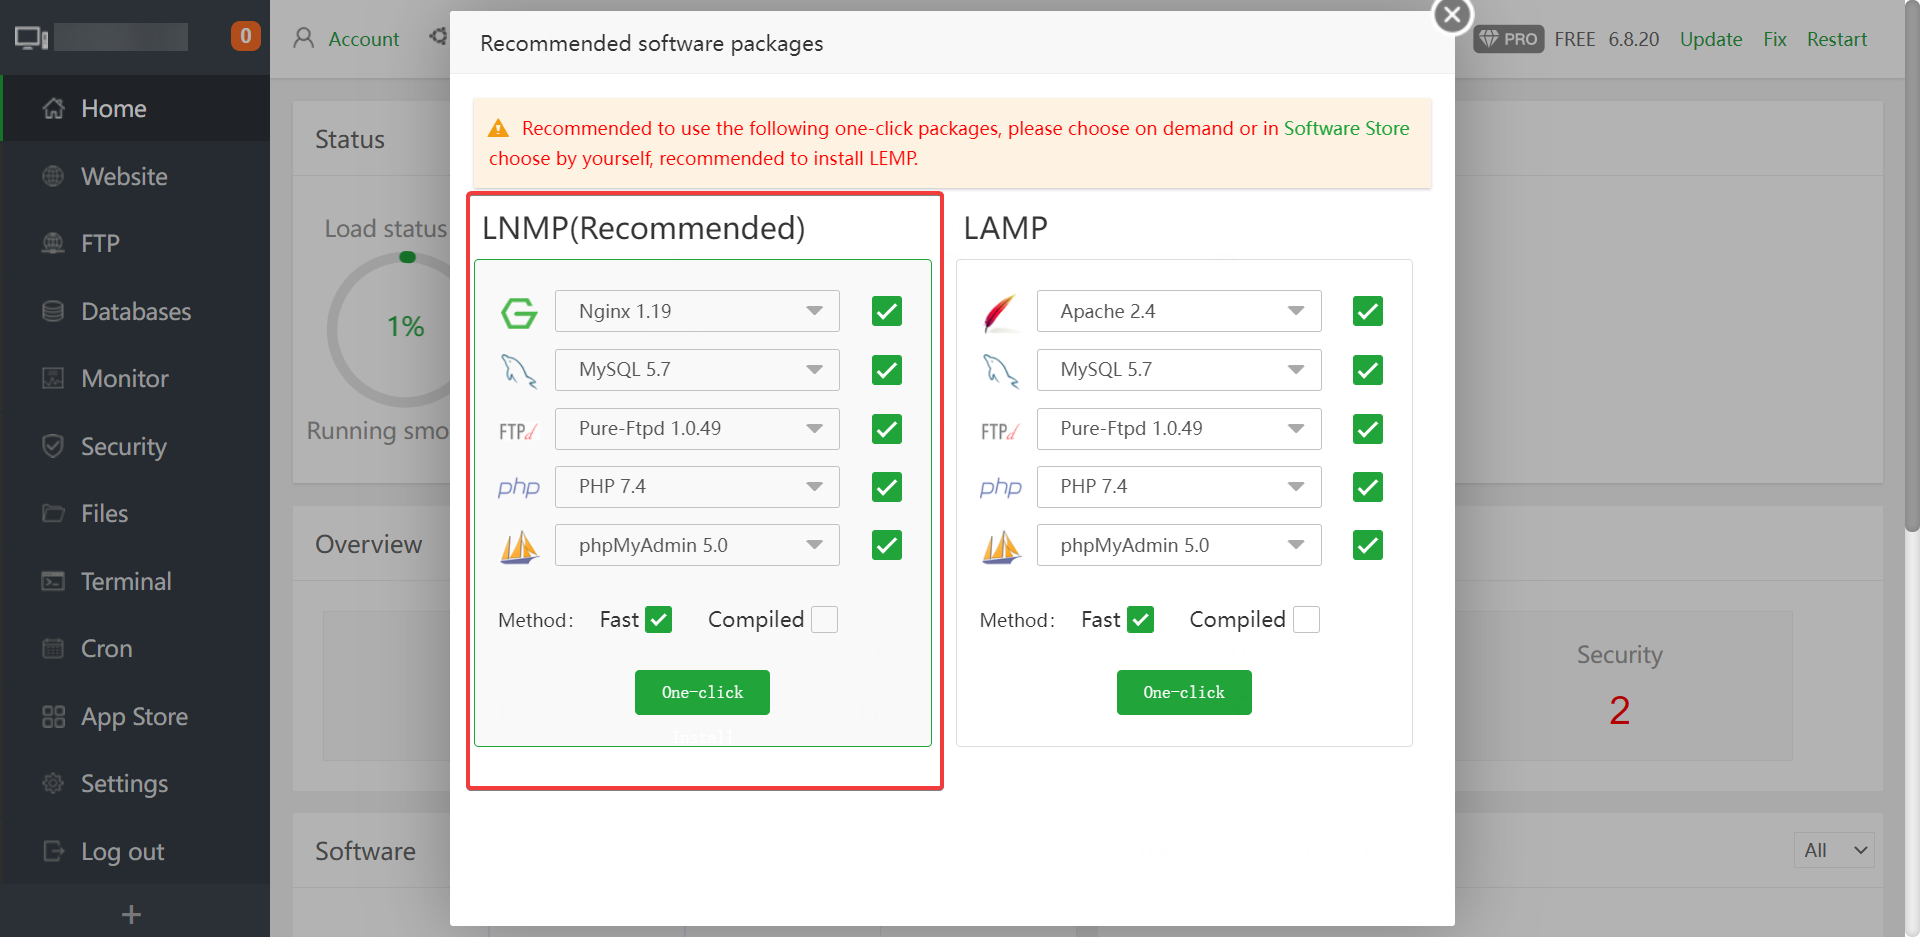 Selecting the LNMP(Recommended) option 